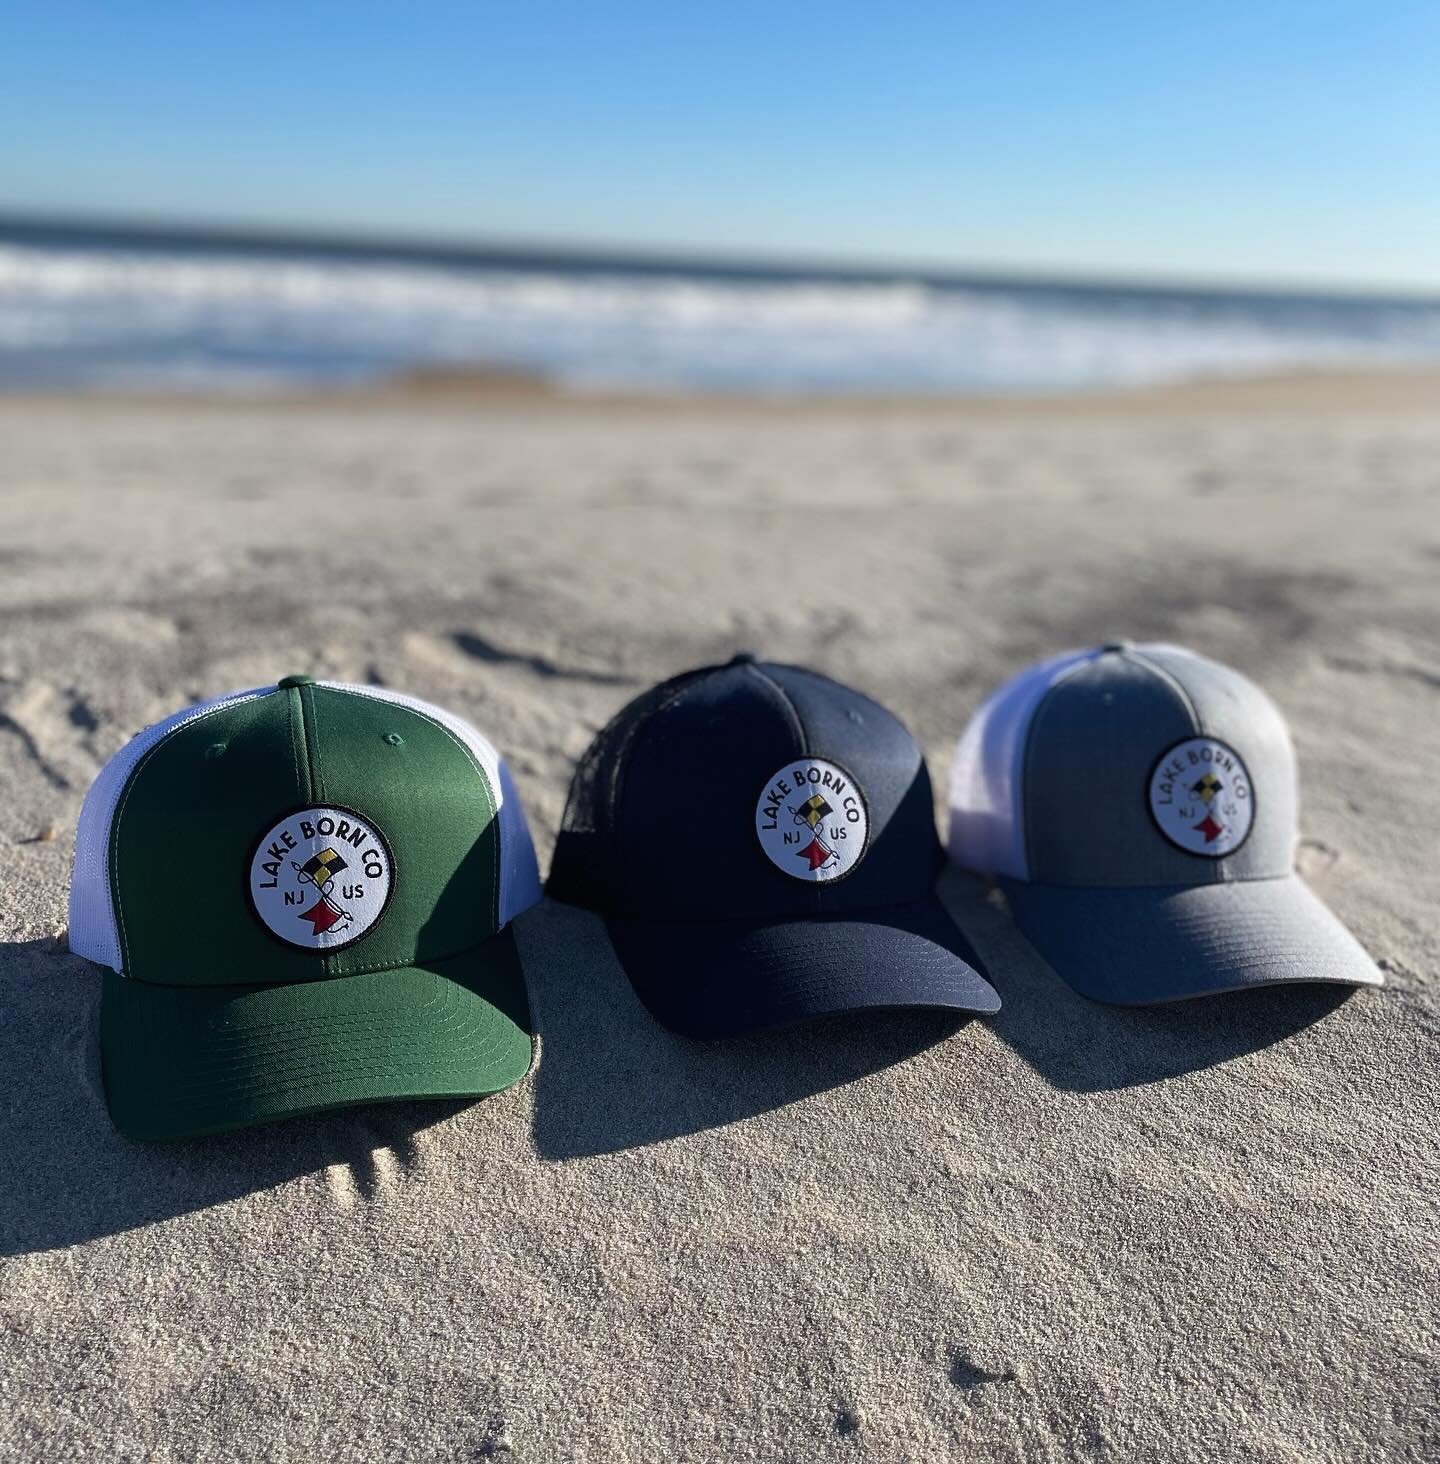 By the beach or by the lake, gear up for summer by repping LBC!

Trucker hats available for purchase at lakeborncoffee.com